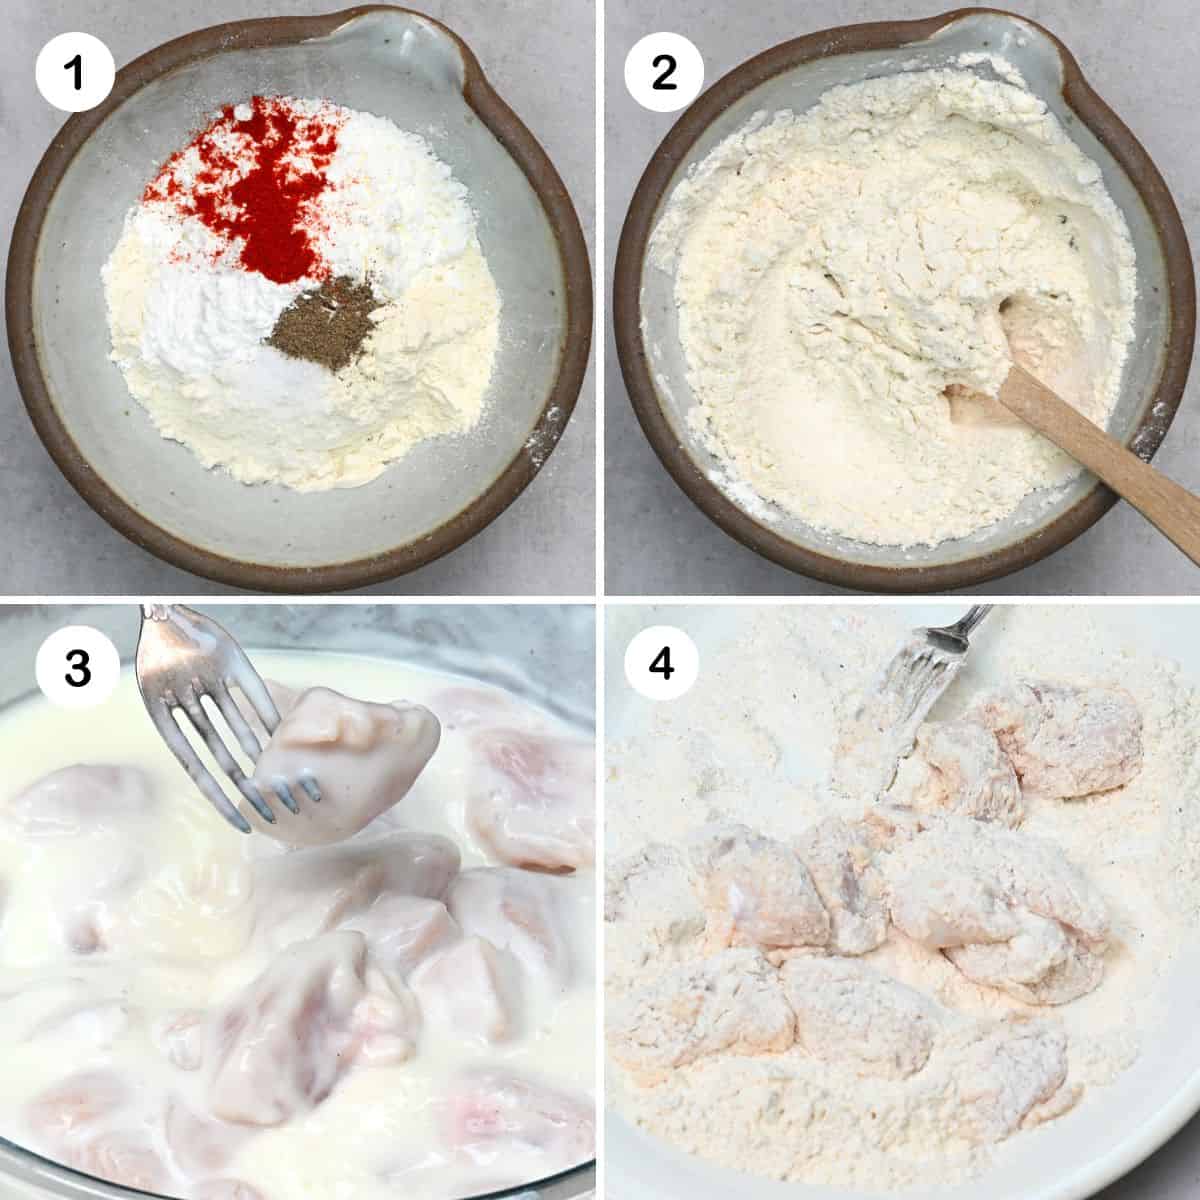 Steps for coating marinated chicken pieces